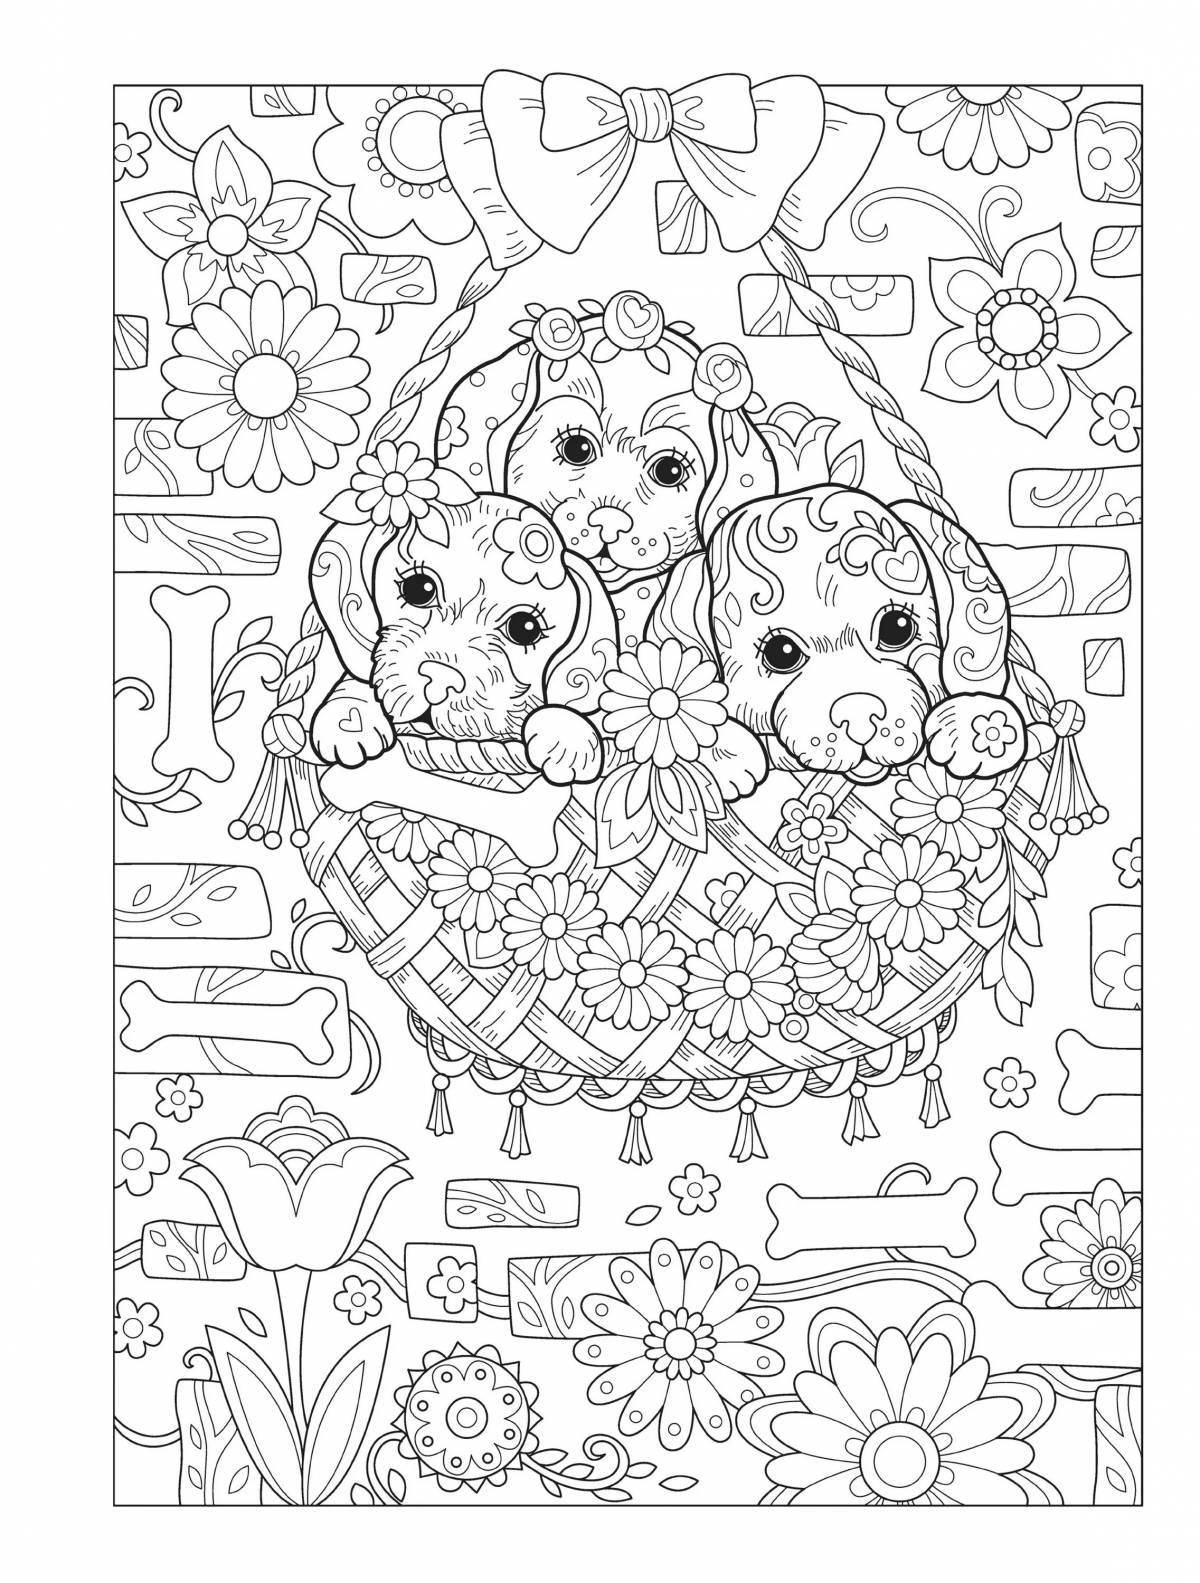 Creative anti-stress coloring book for children 7 years old